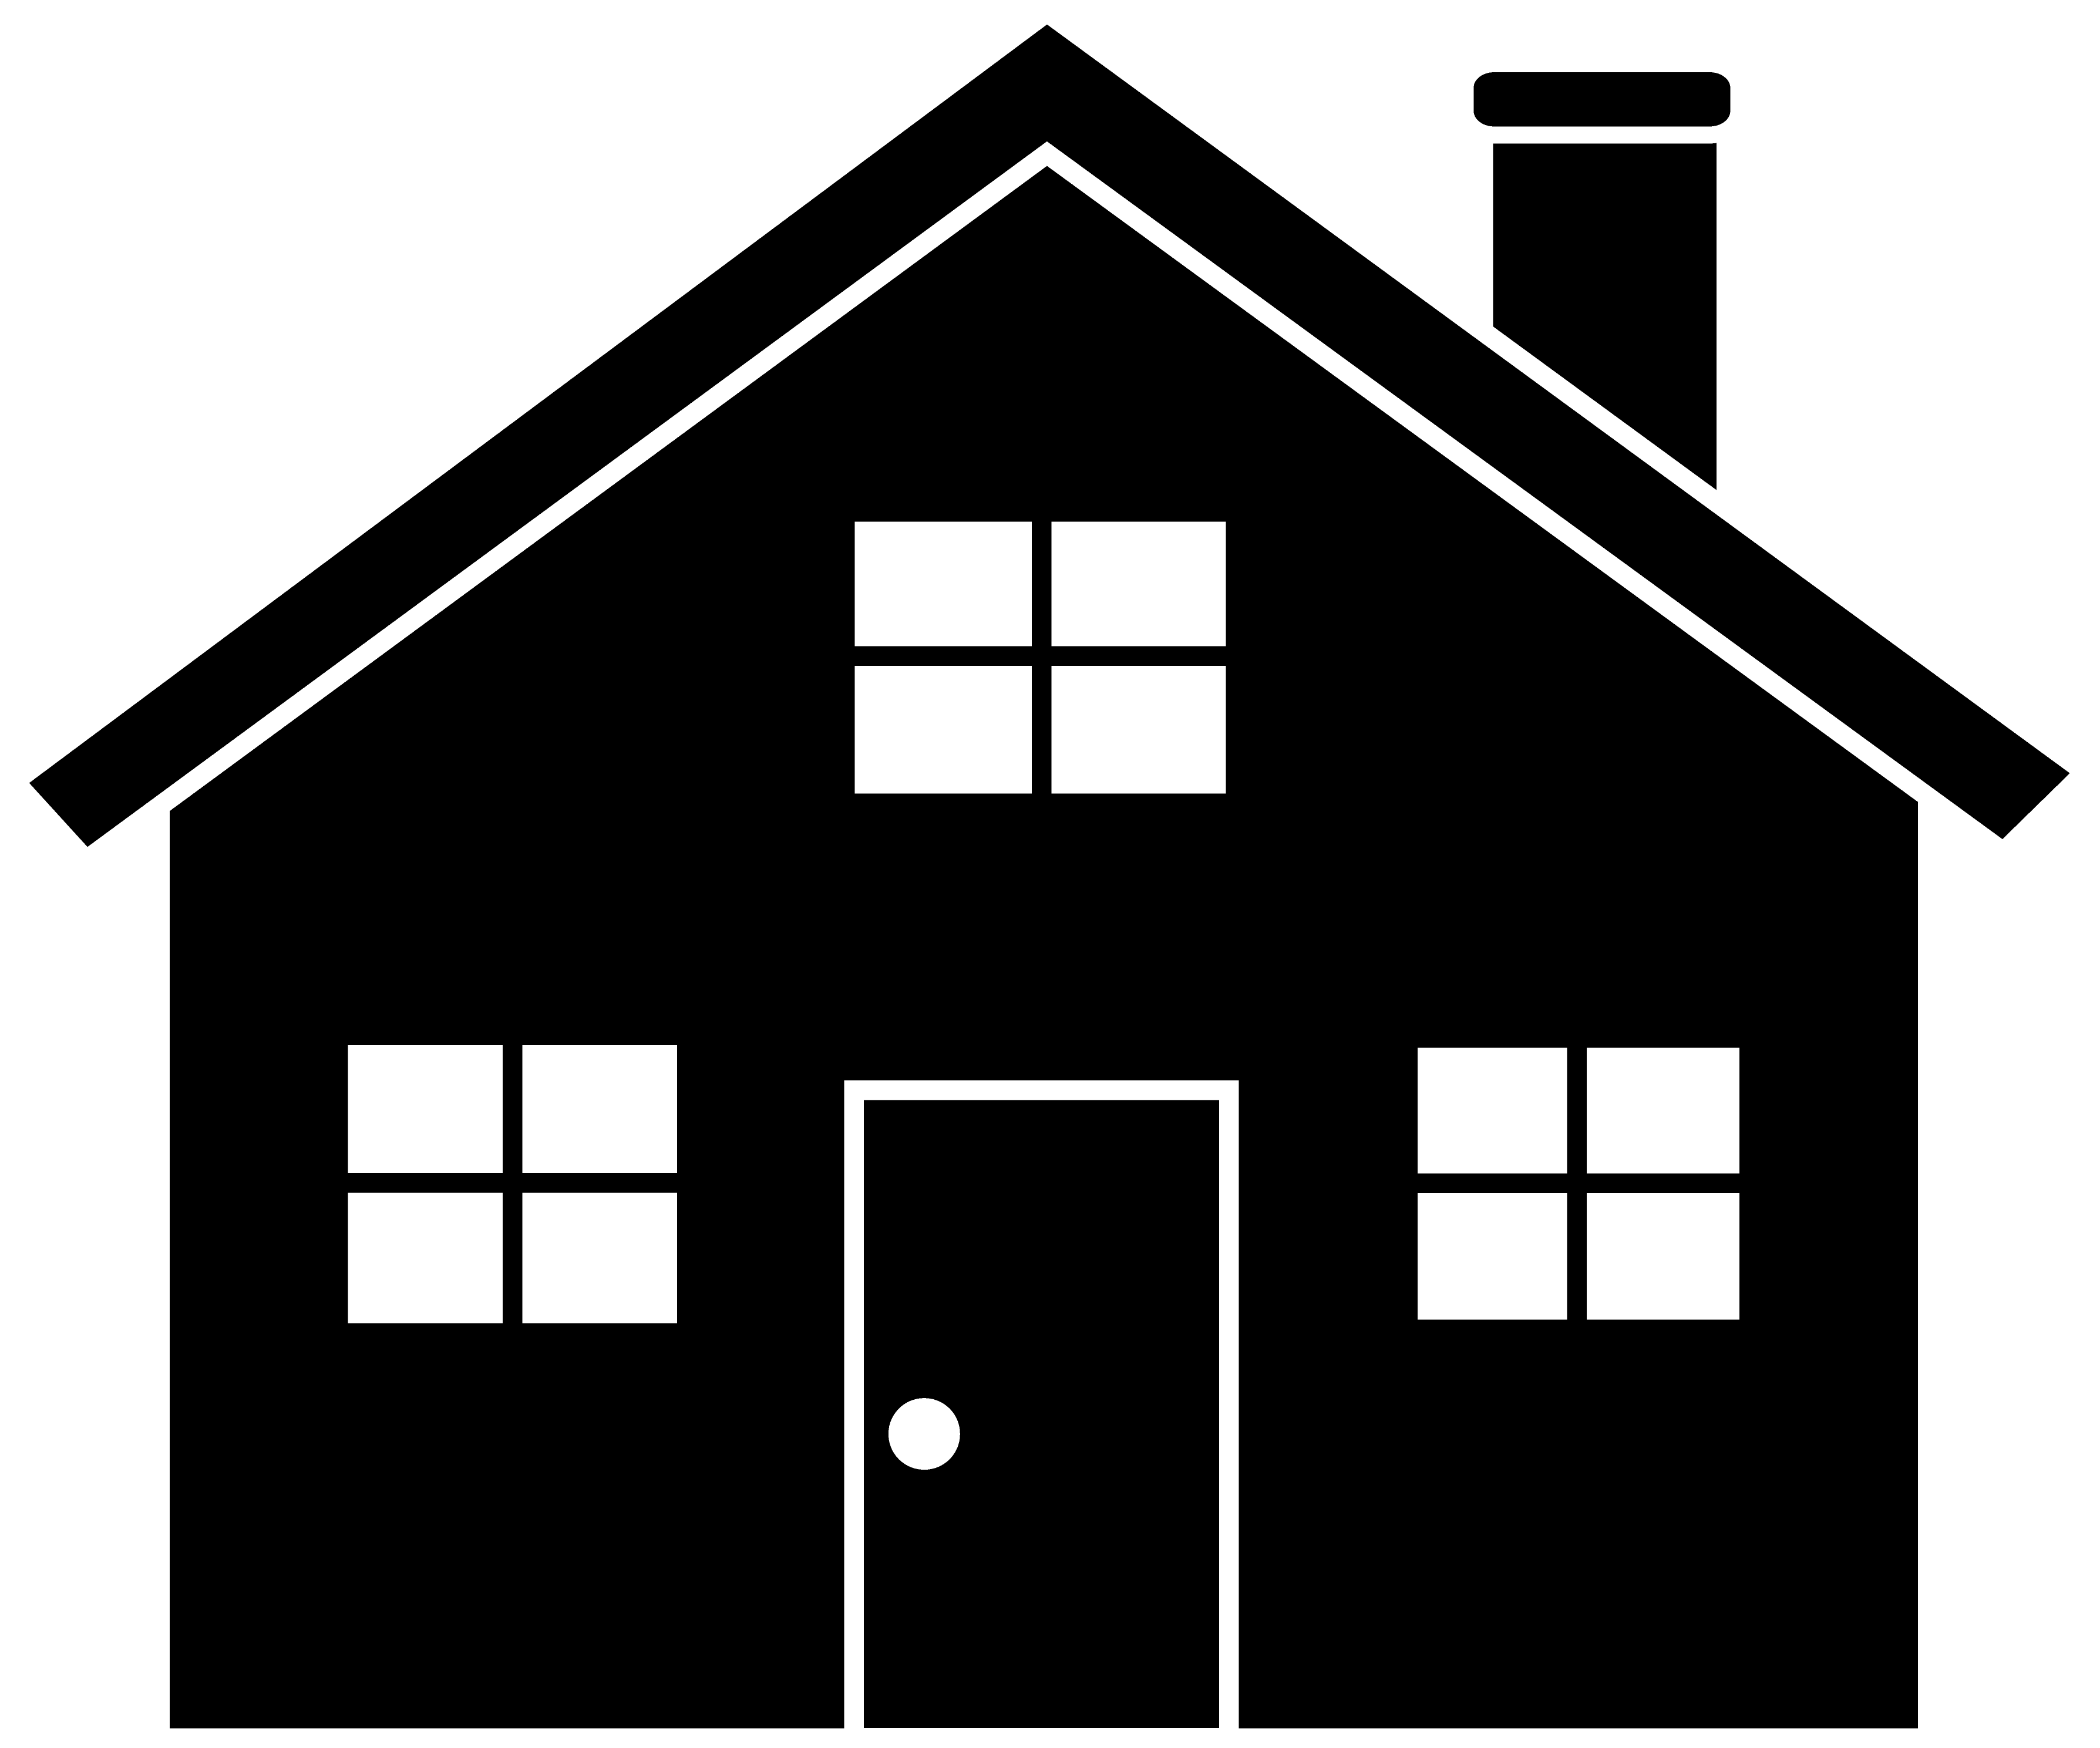 Movies clipart home clipart. Image of house black